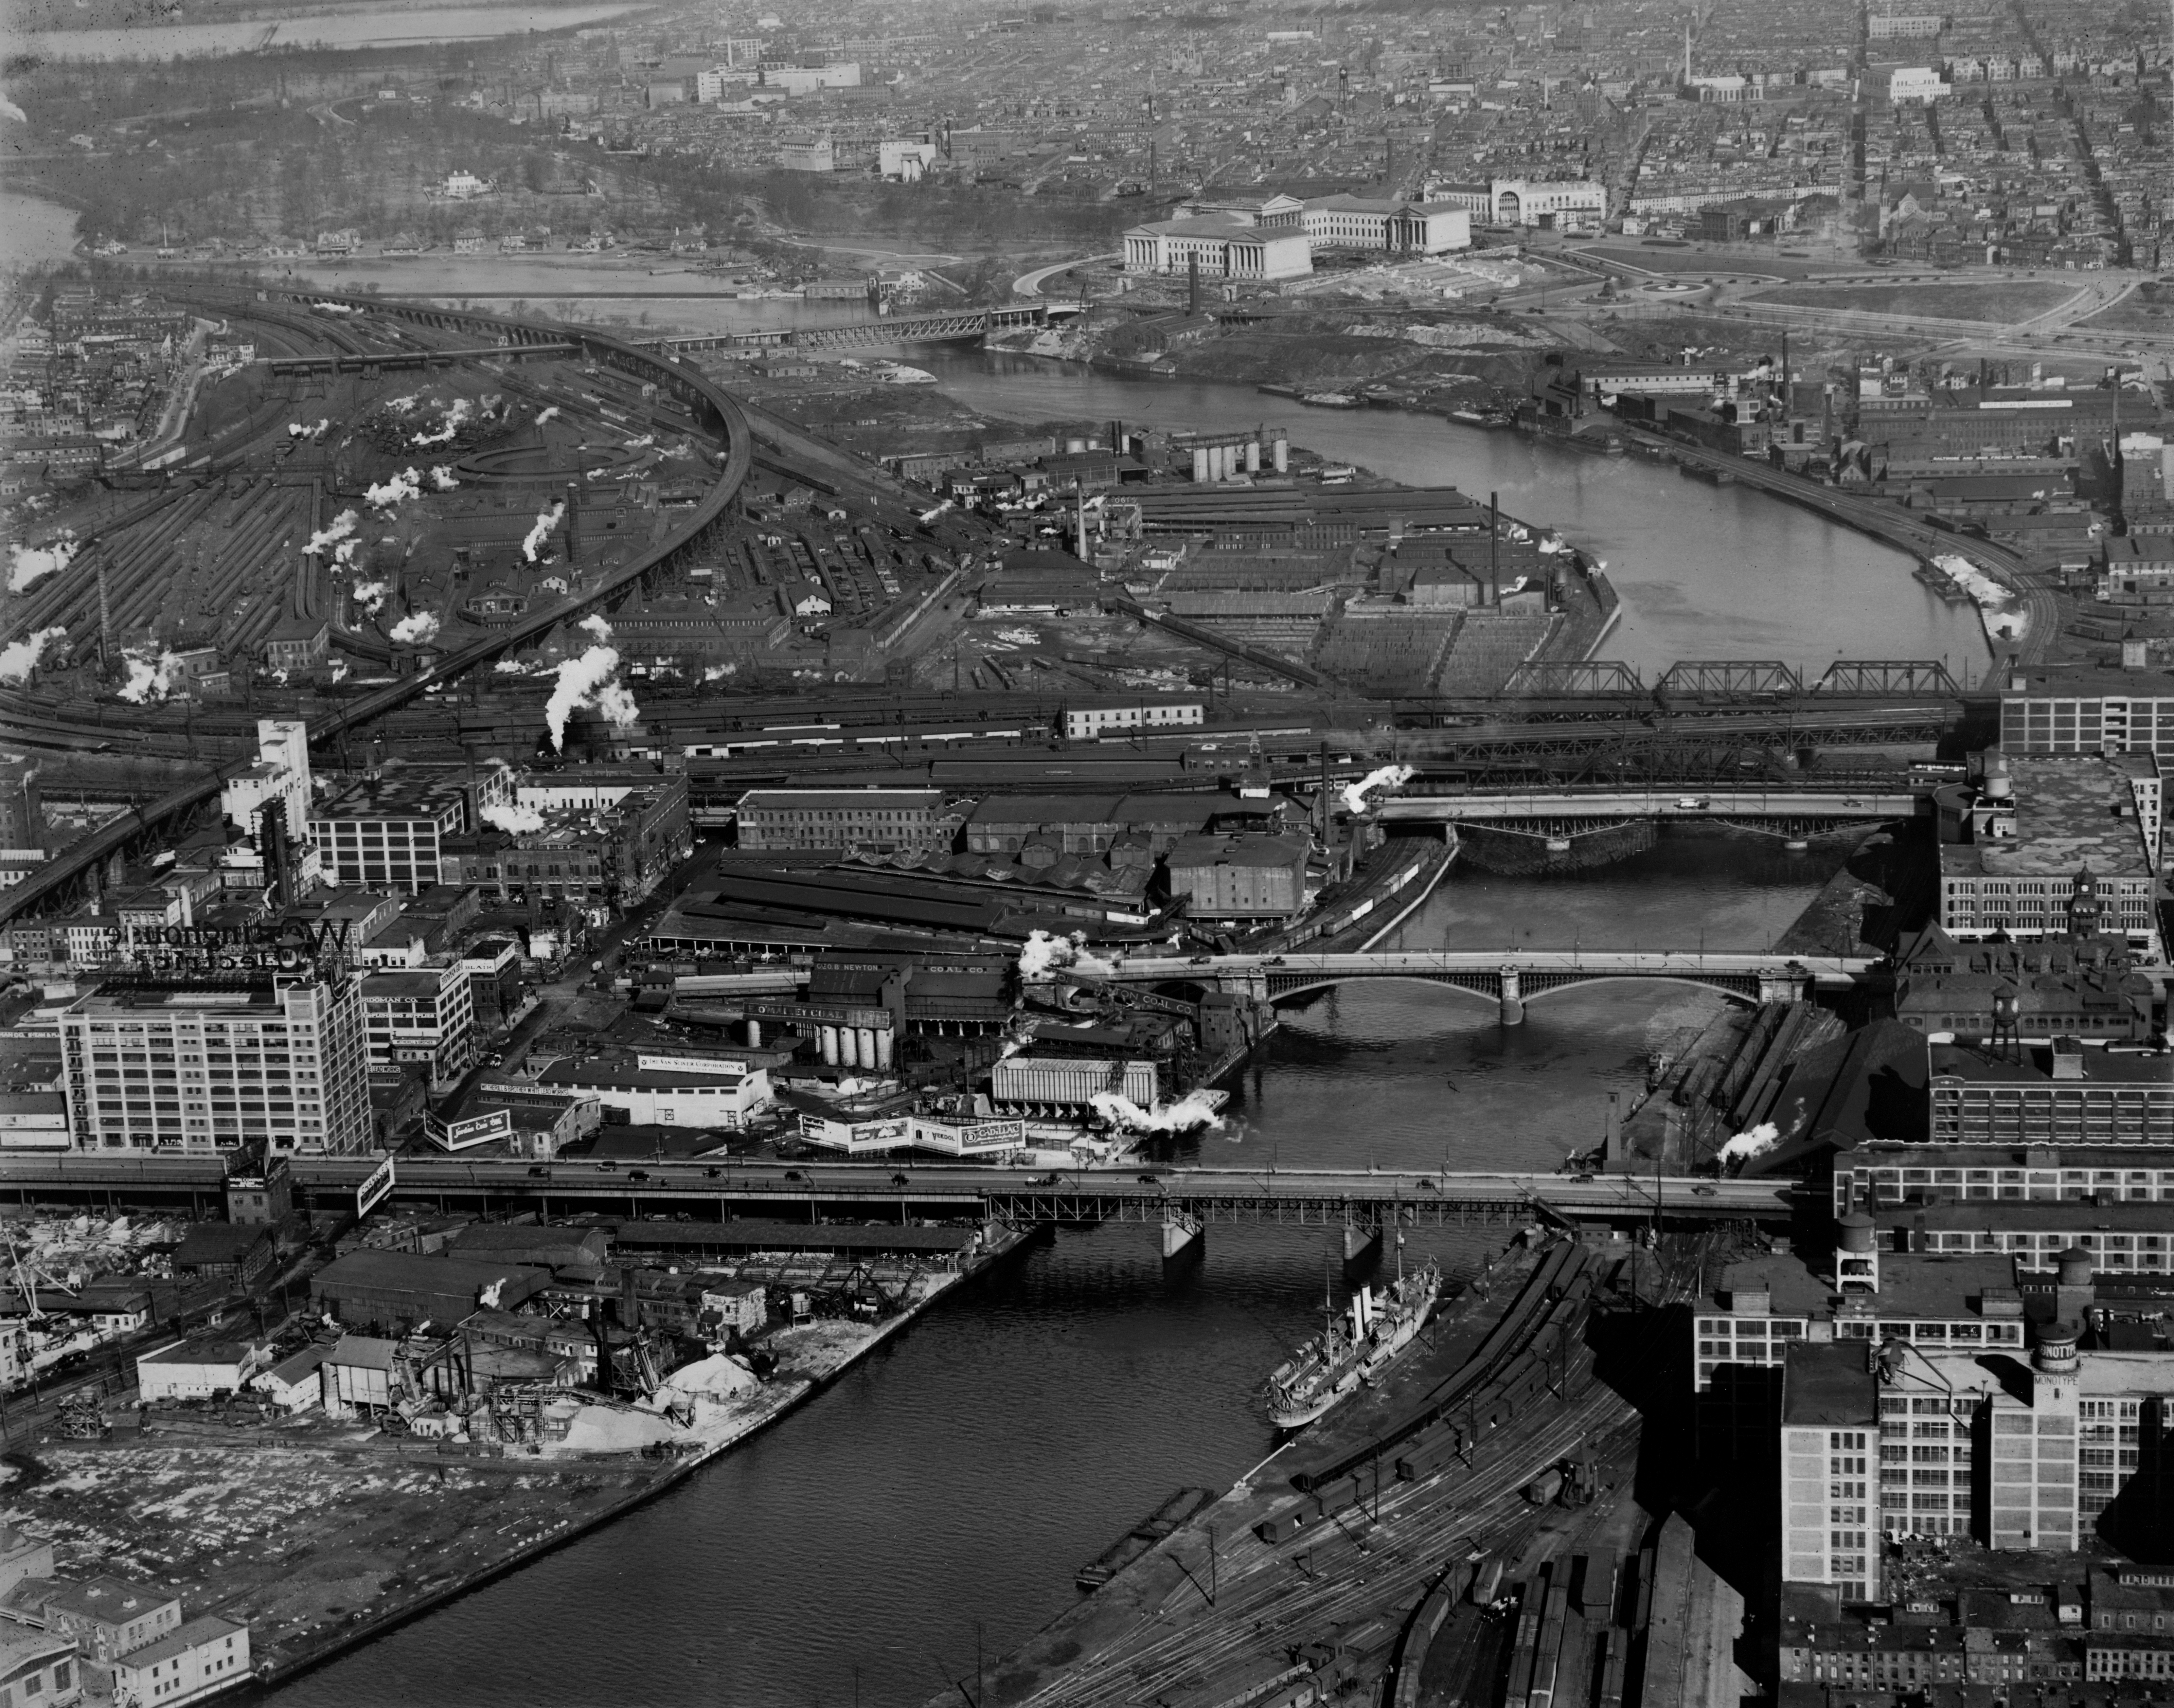  Schuylkill River from South Street, December 31, 1927. | (Image #7123) Aero Service Corp., courtesy of Aerial Viewpoint, Spring, TX